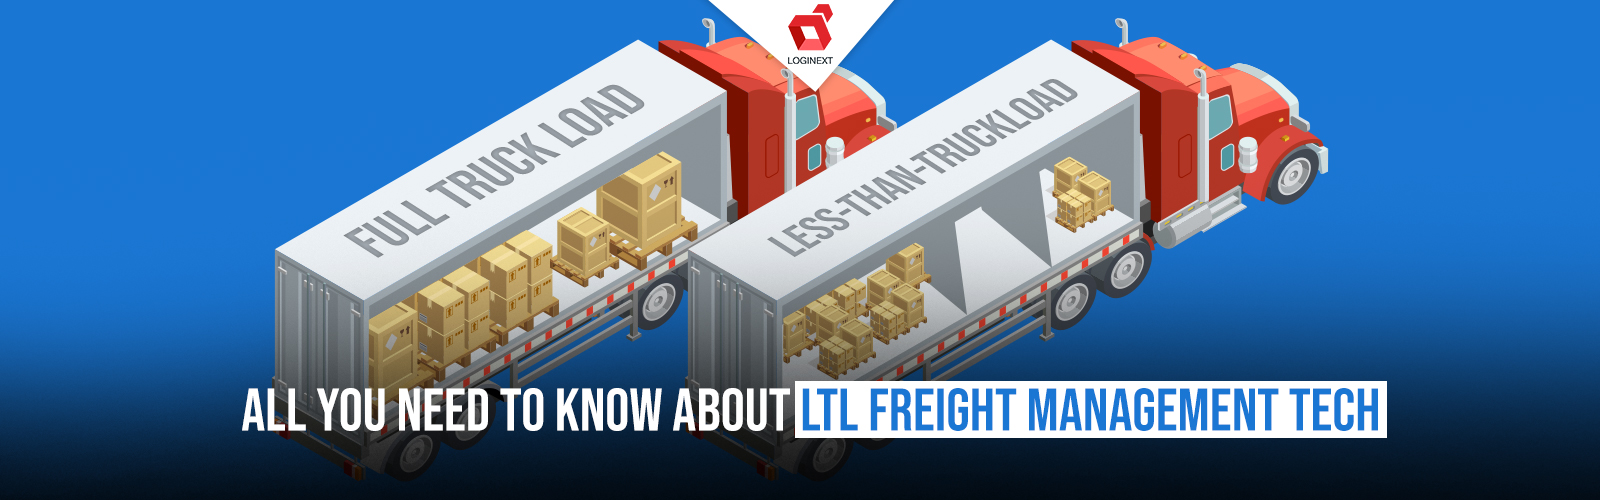 What is LTL Freight? And how can tech improve Freight Management?